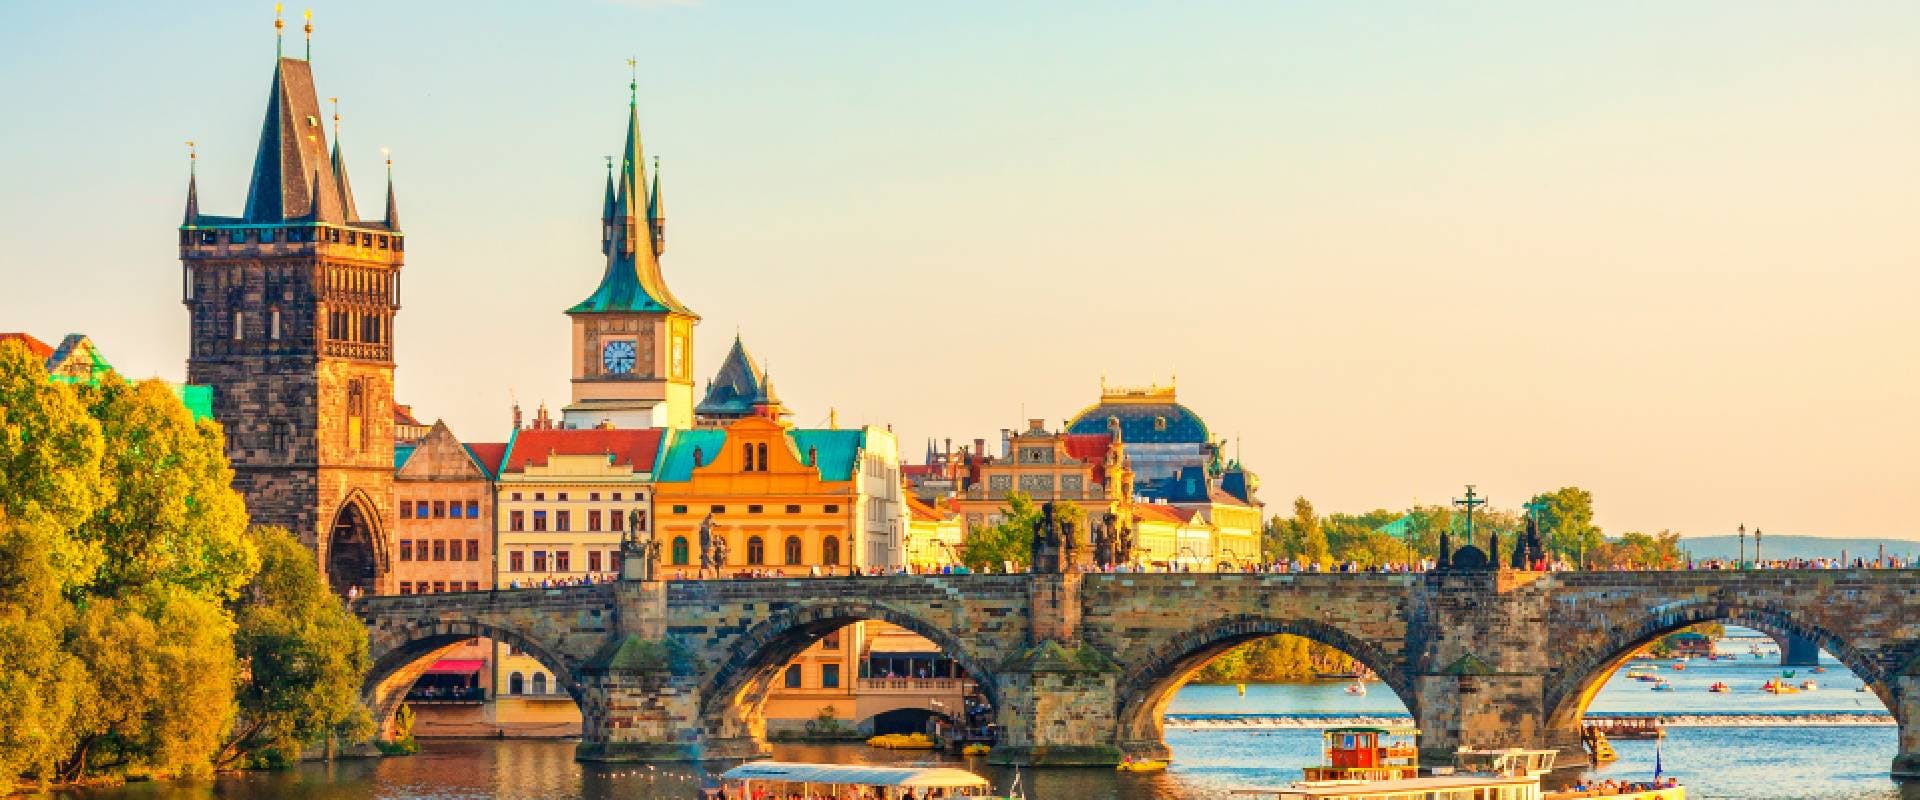 Charles Bridge and architecture of the old town in Prague